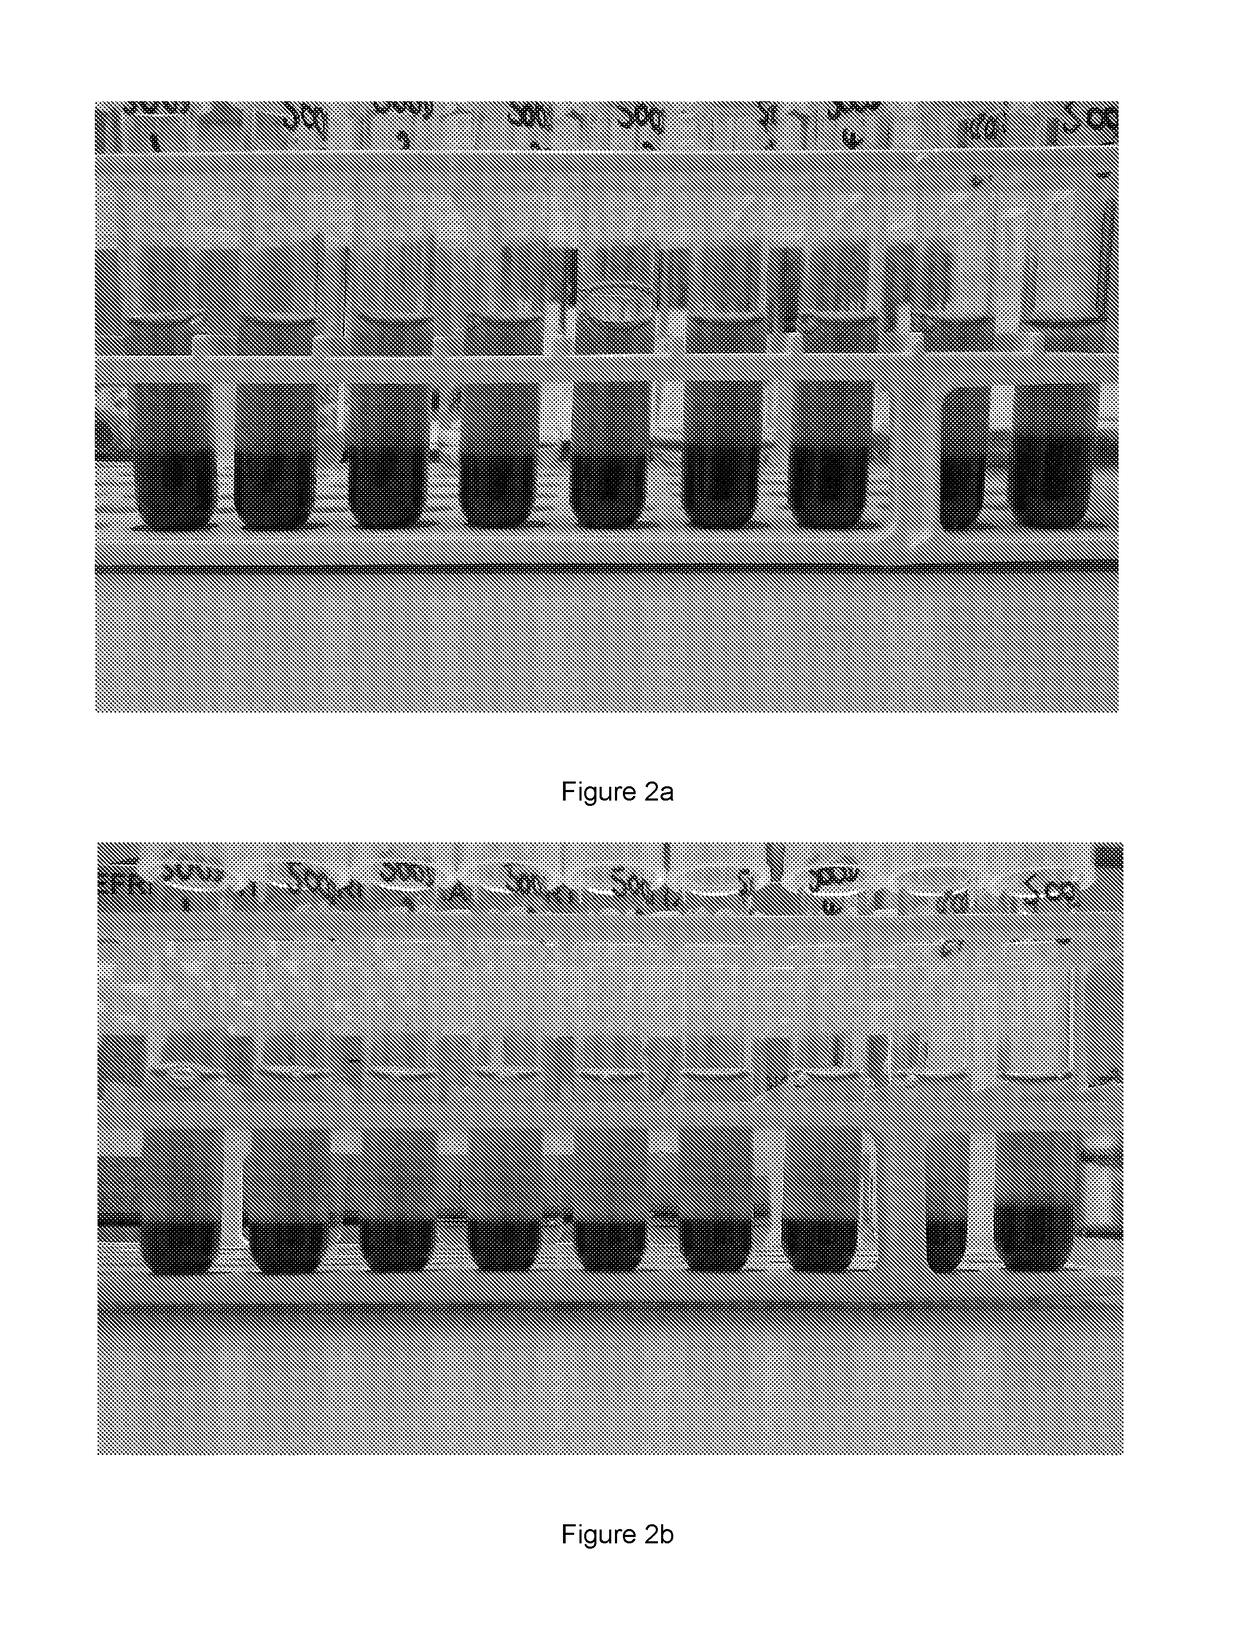 Methods of cell separation